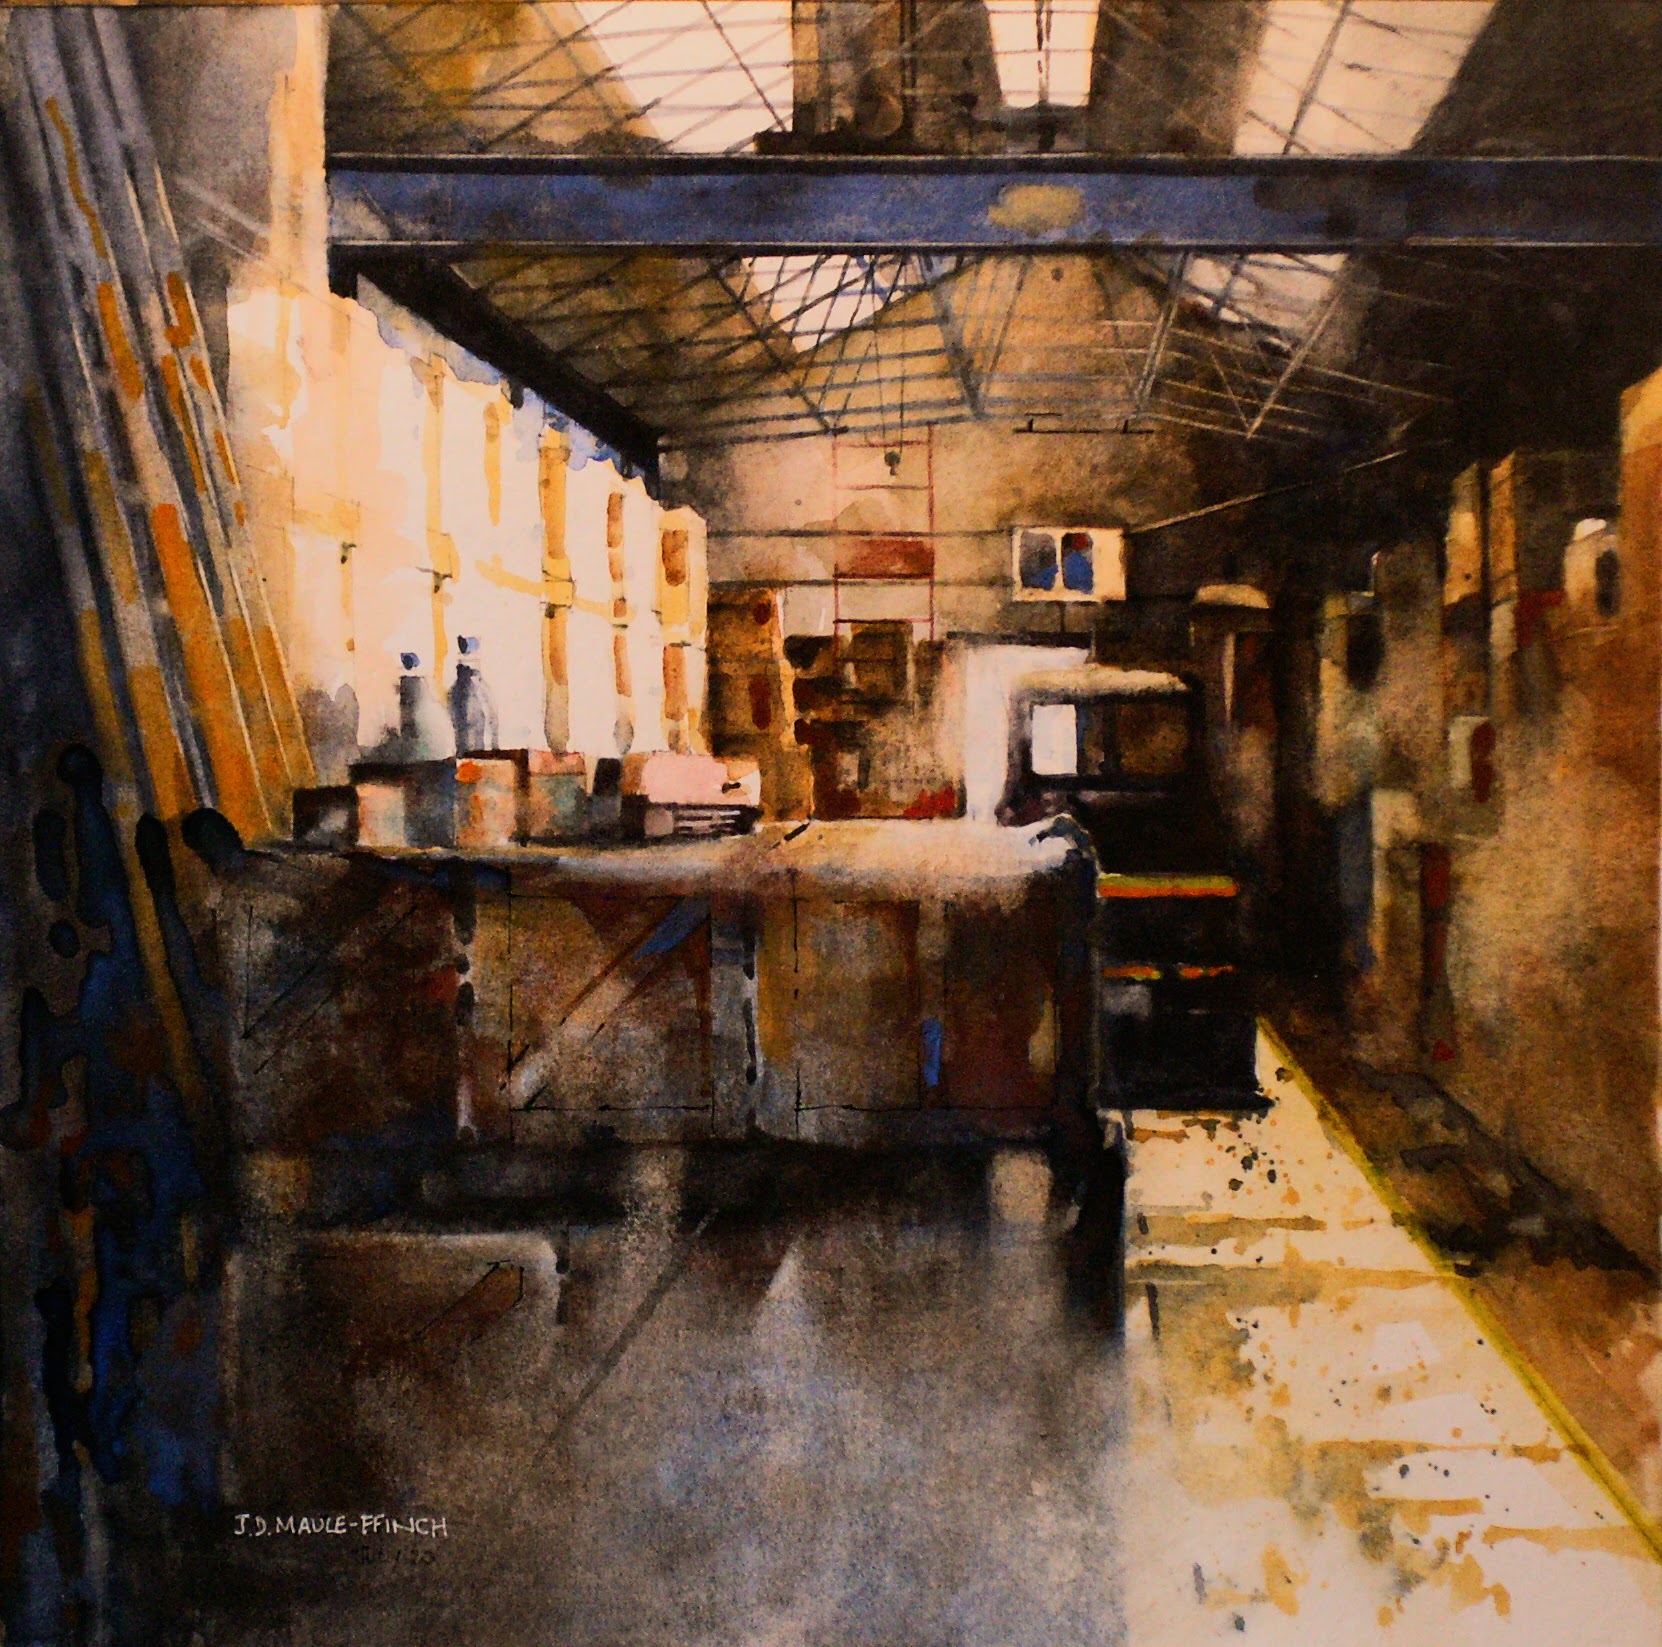 Painting of interior of a warehouse